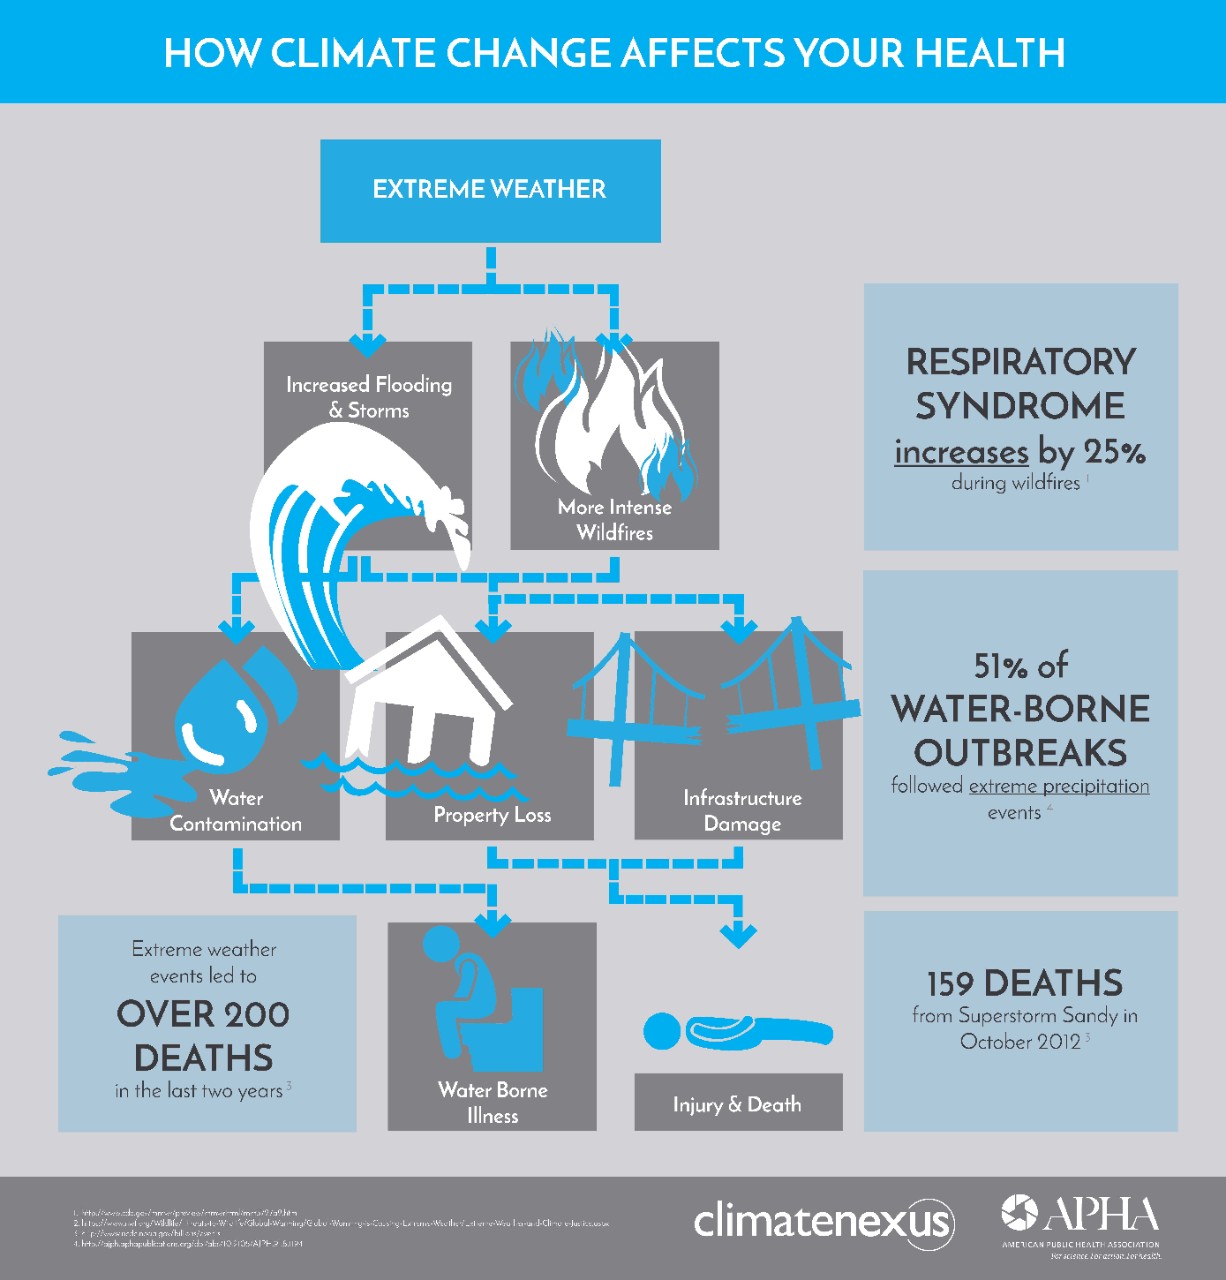 APHA_how_climate_affects_health_extreme_weather